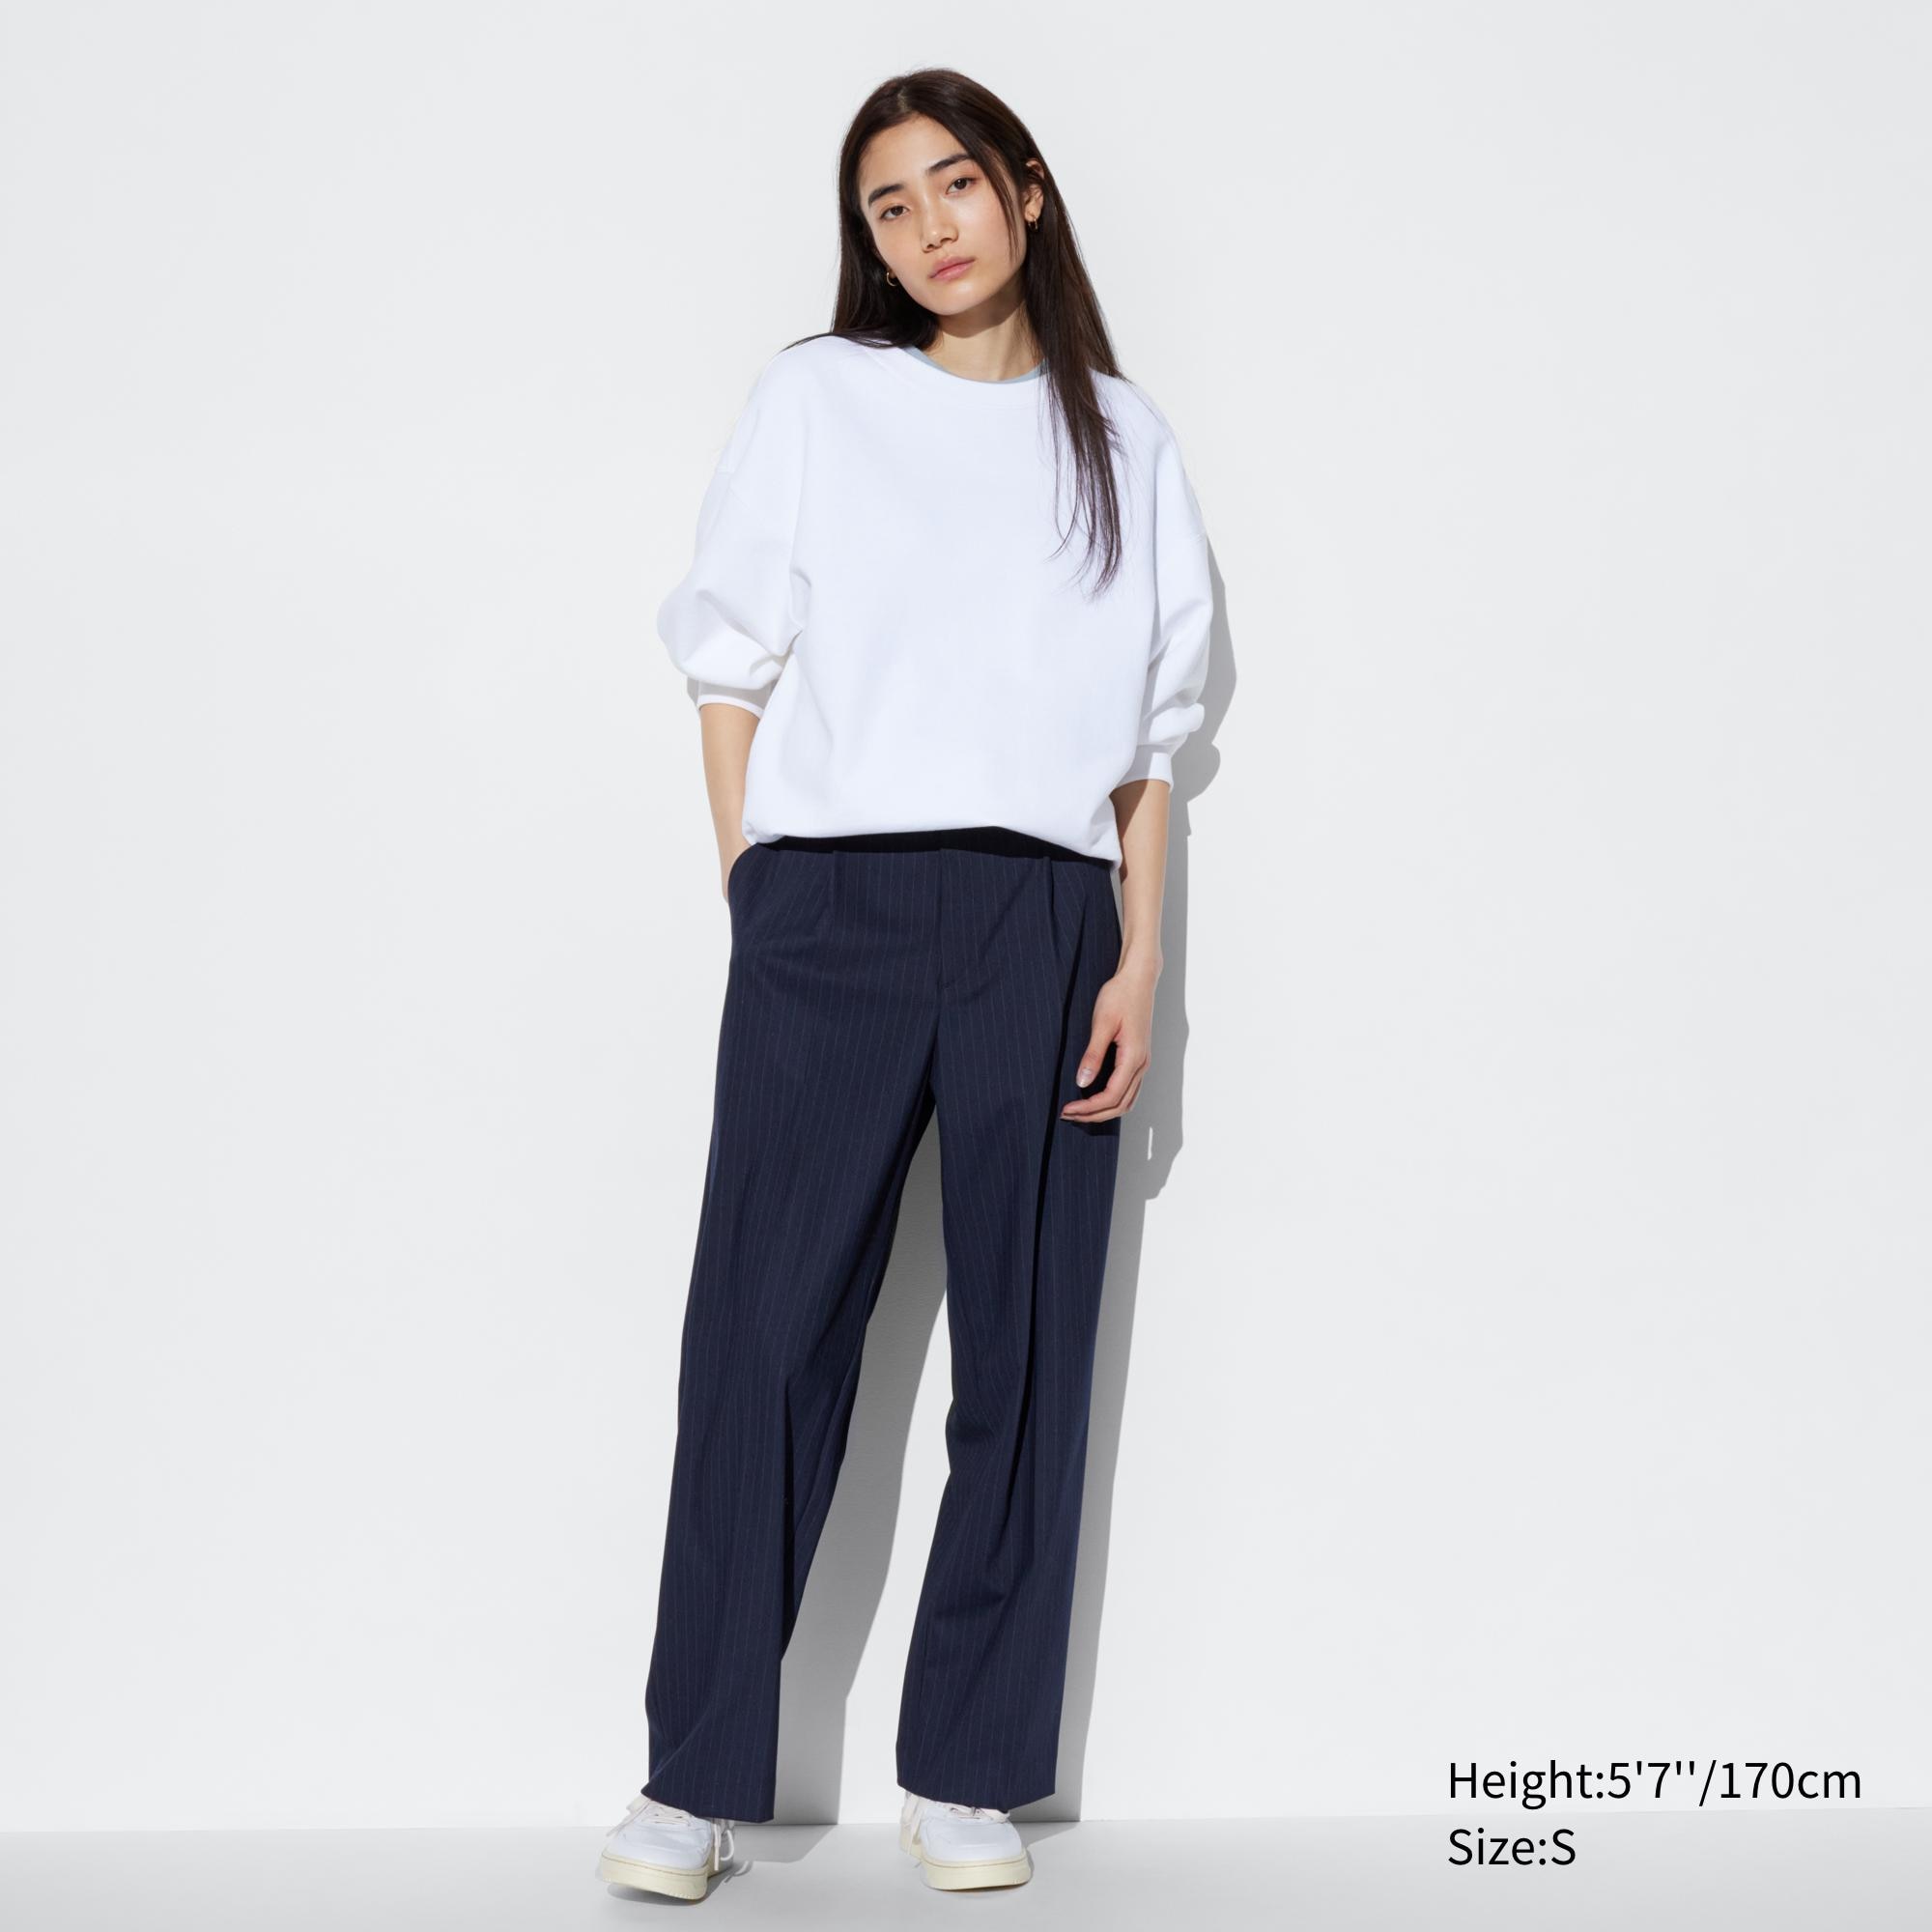 UNIQLO on X: #UniqloUS Pleated pants round-up! We love to see